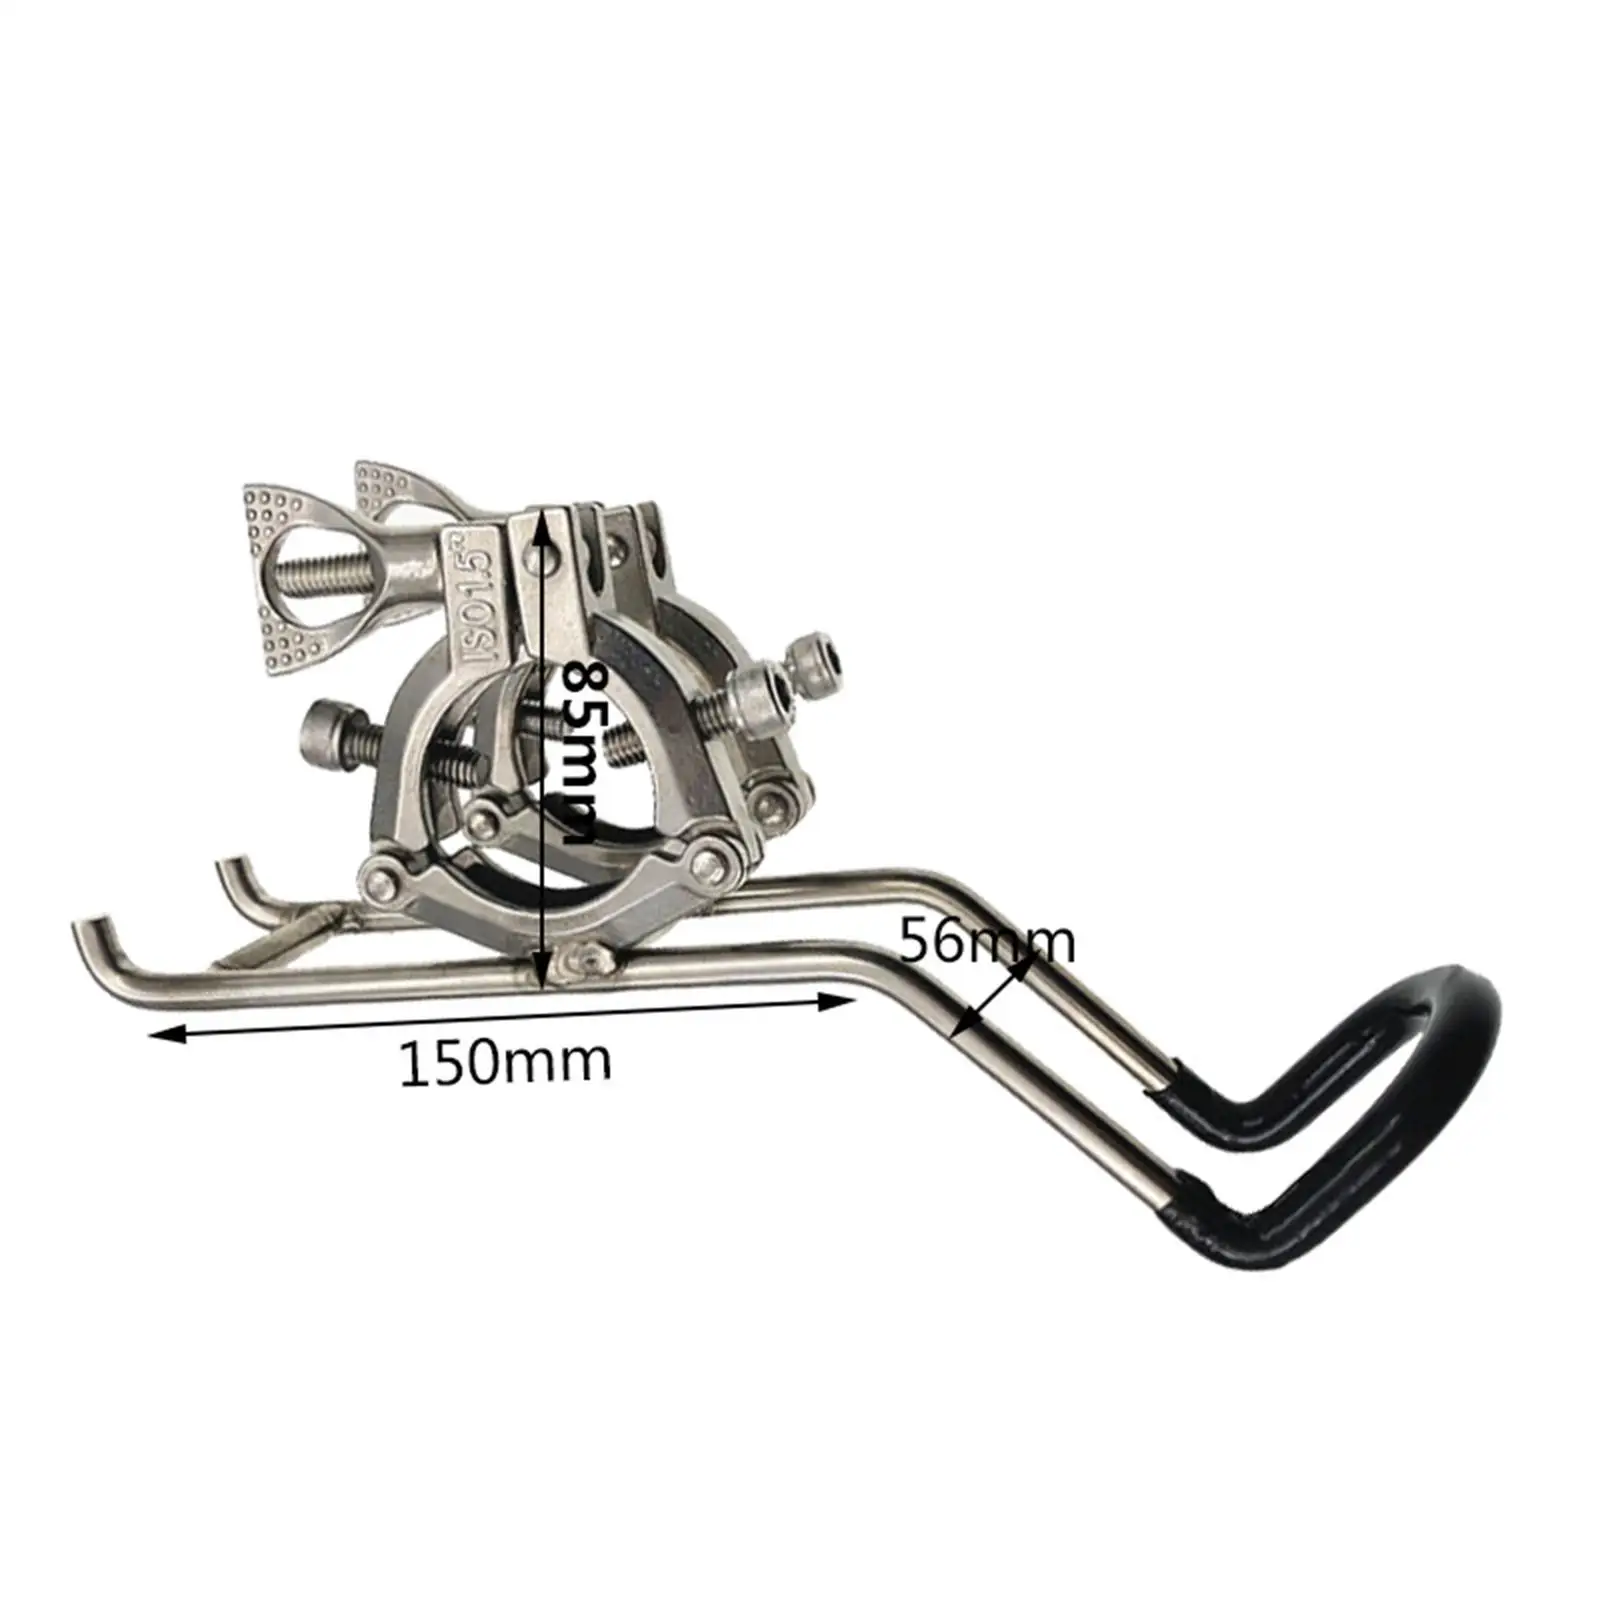 Boat Fishing Rod Holder Clamp Double Wire Adjustable Bracket Fit for Fishing Boat